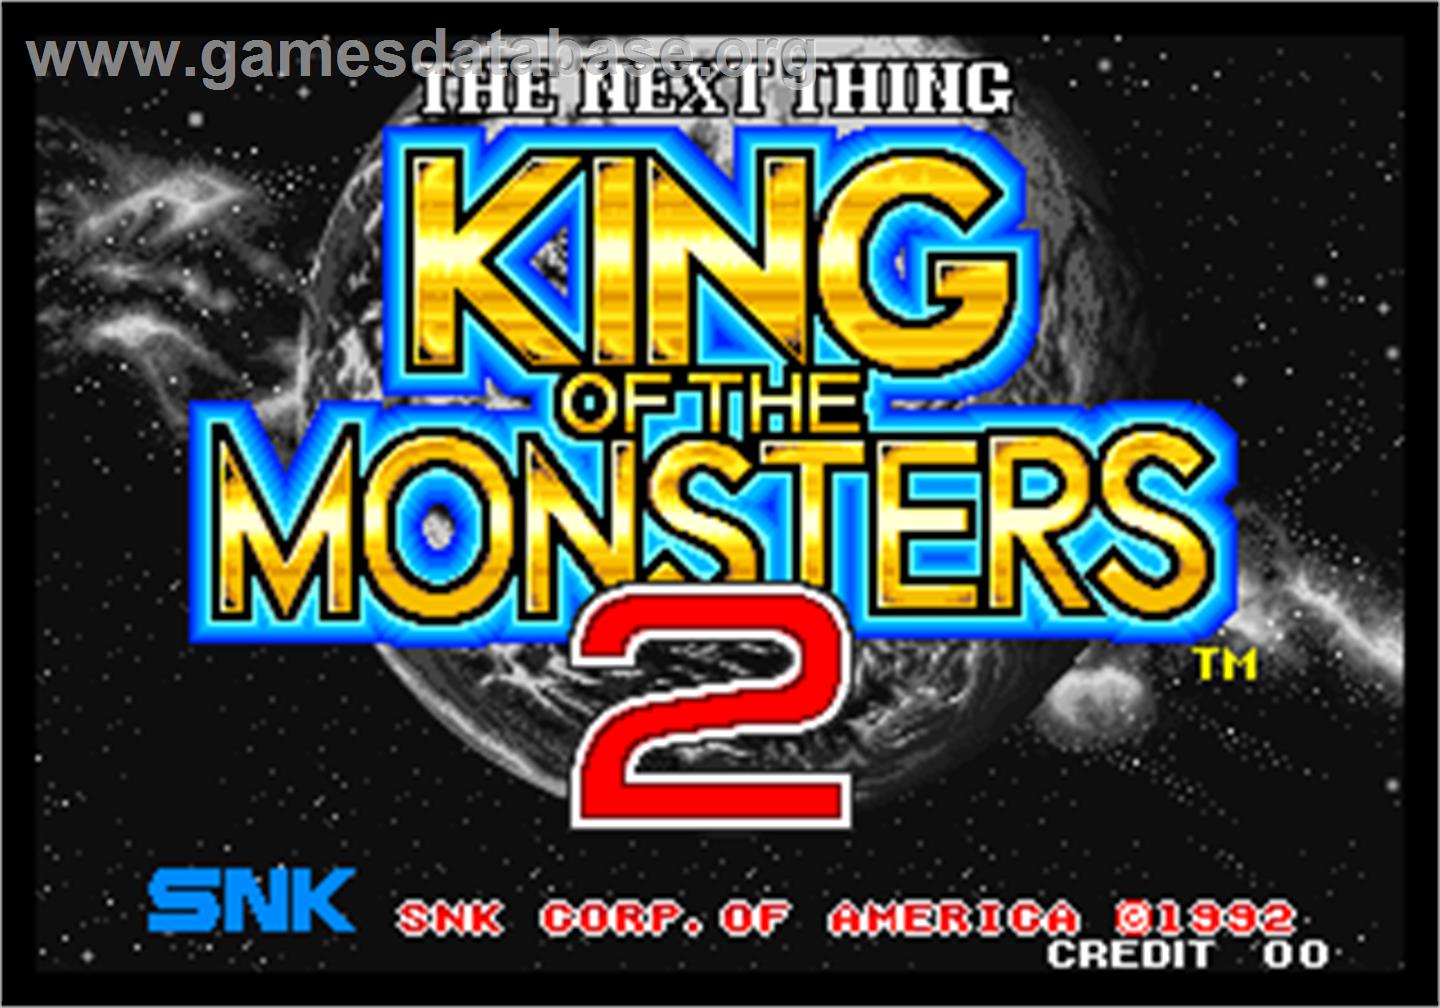 King of the Monsters 2 - The Next Thing - Arcade - Artwork - Title Screen